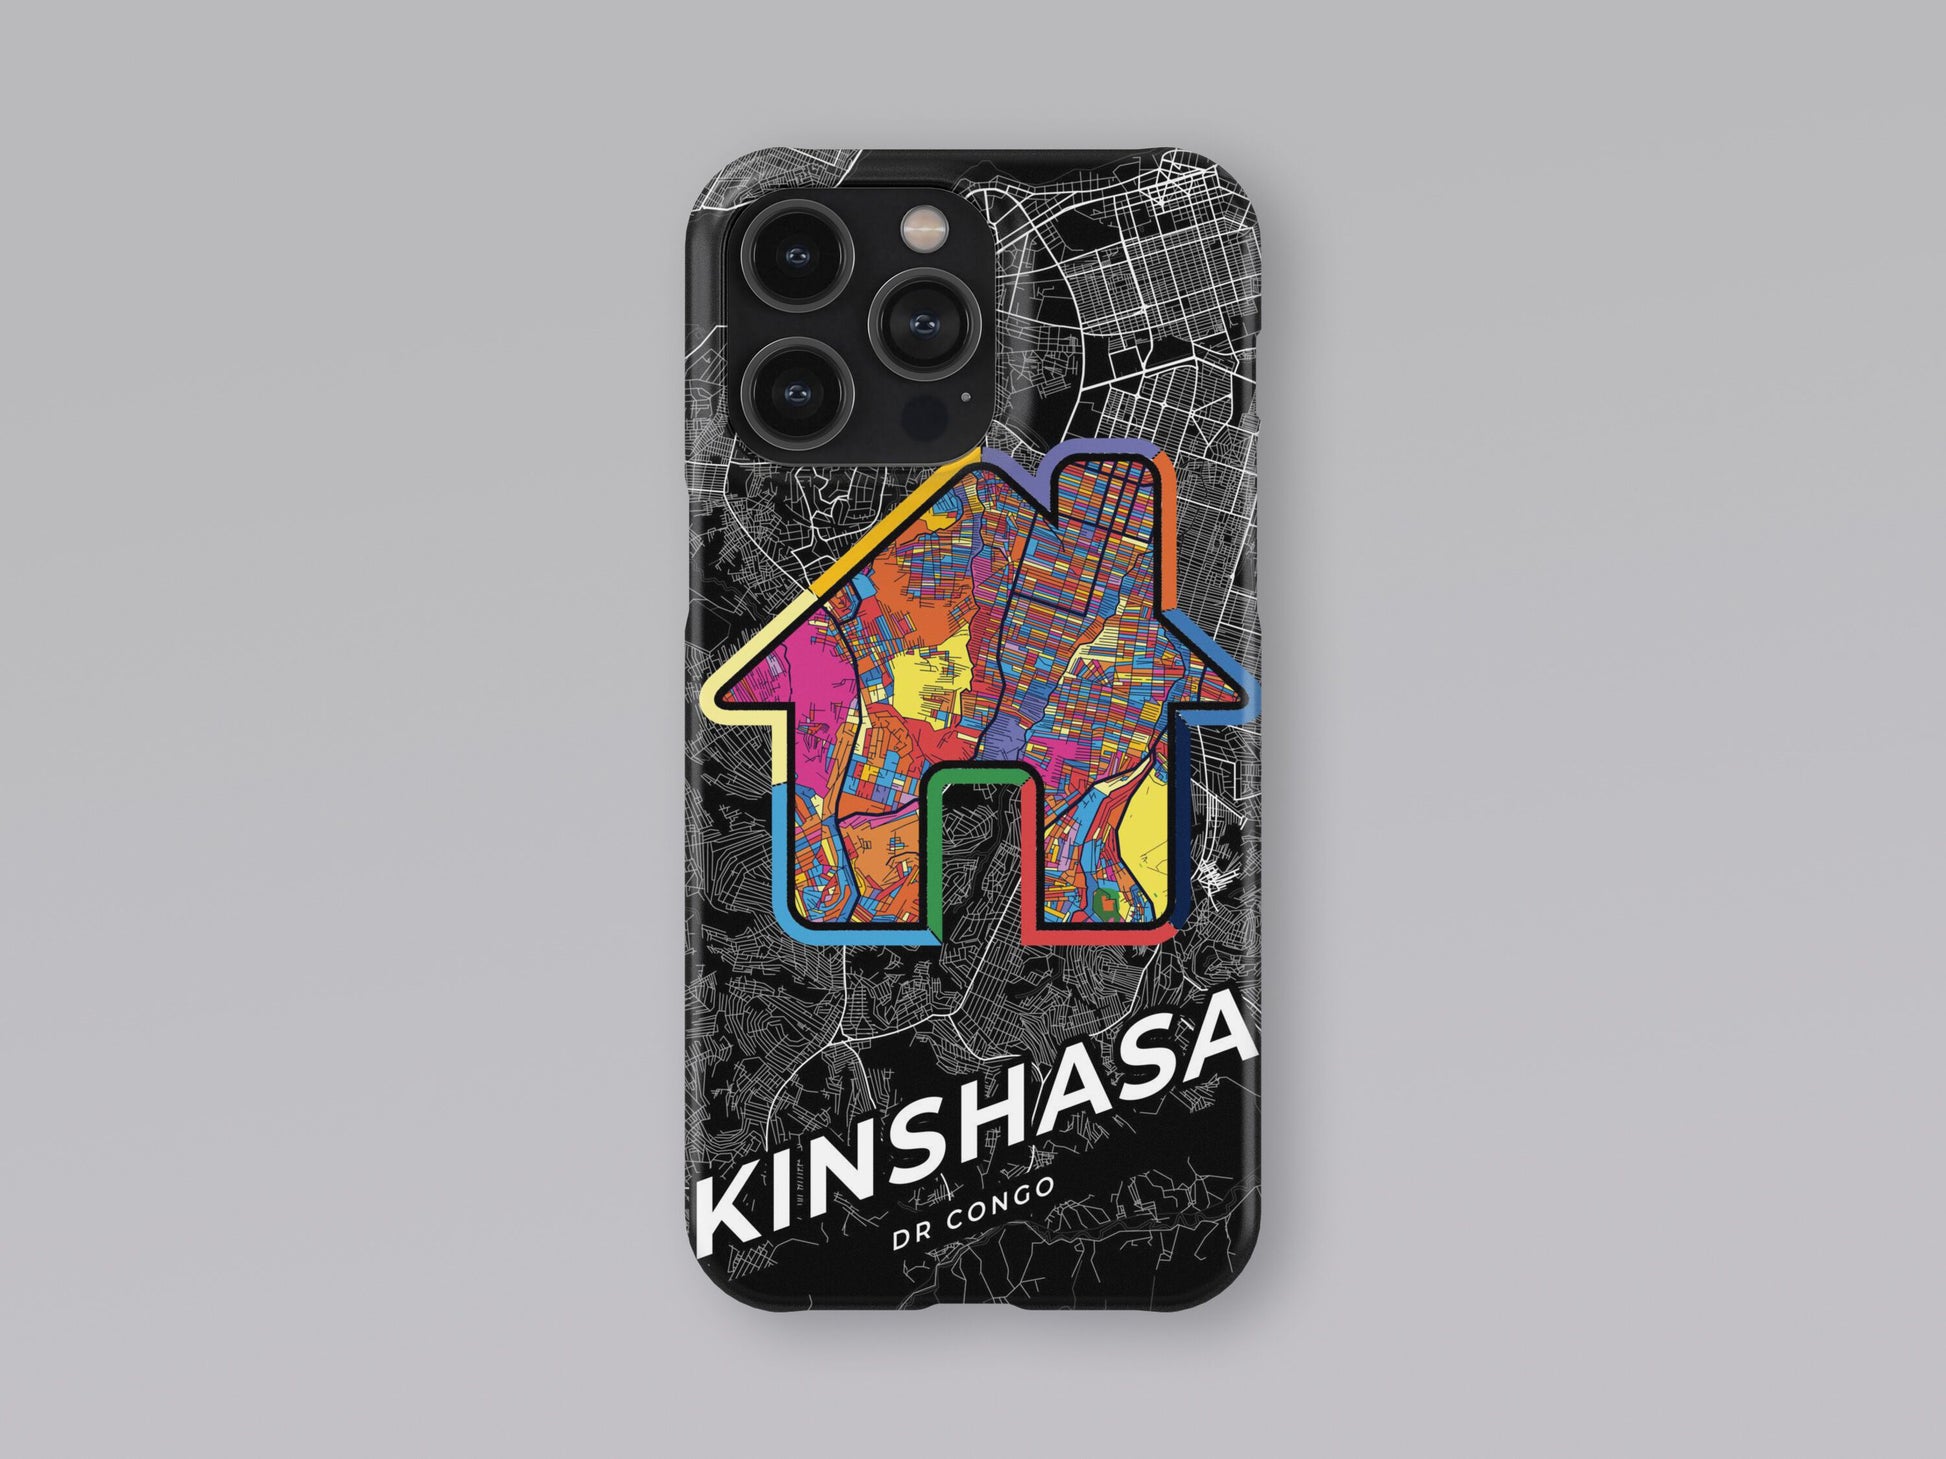 Kinshasa Dr Congo slim phone case with colorful icon. Birthday, wedding or housewarming gift. Couple match cases. 3